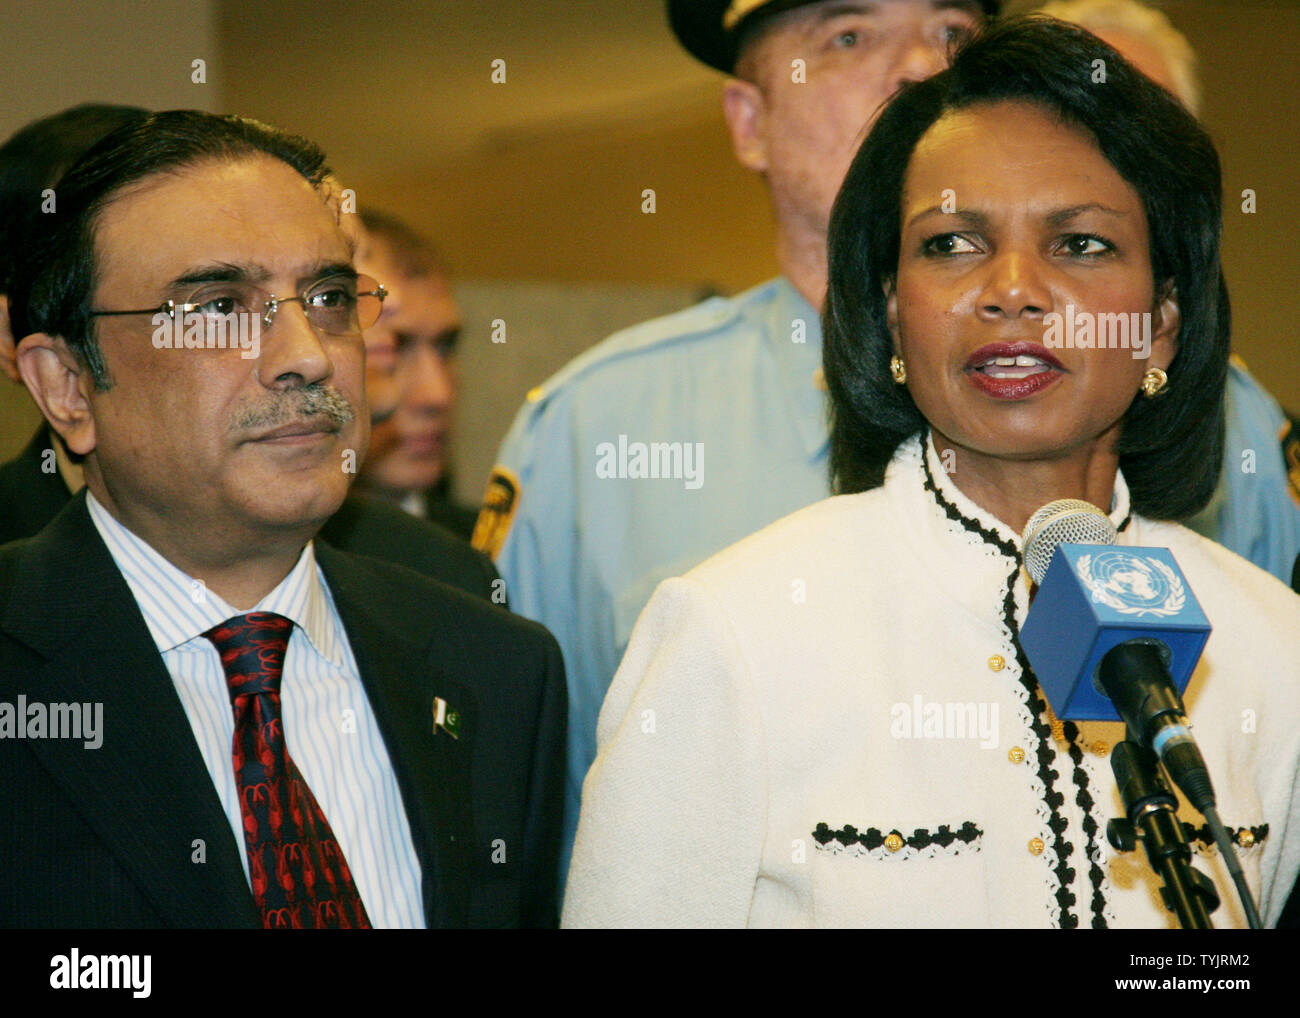 Secretary of State Condolezza Rice speaks to the press as Asif Ali Zardari, president of Pakistan, listens following their Friends of Pakistan meeting during the 63rd session of the General Assembly at the United Nations on September 26, 2008 in New York City. (UPI Photo/Monika Graff) Stock Photo